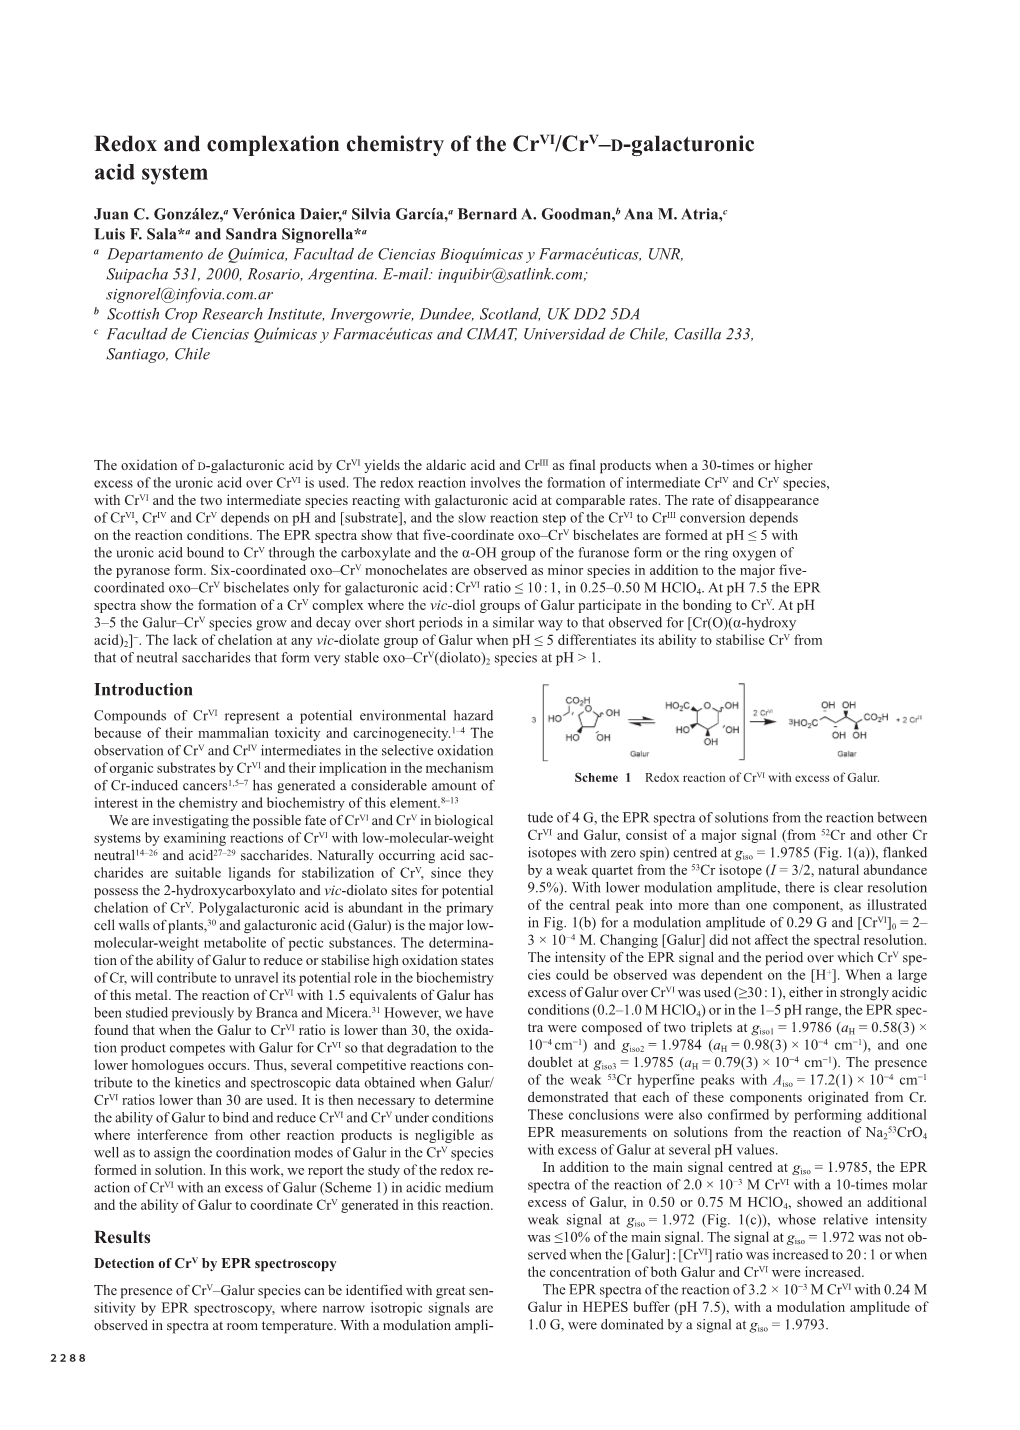 Redox and Complexation Chemistry of the Crvi/Crv–D-Galacturonic Acid System